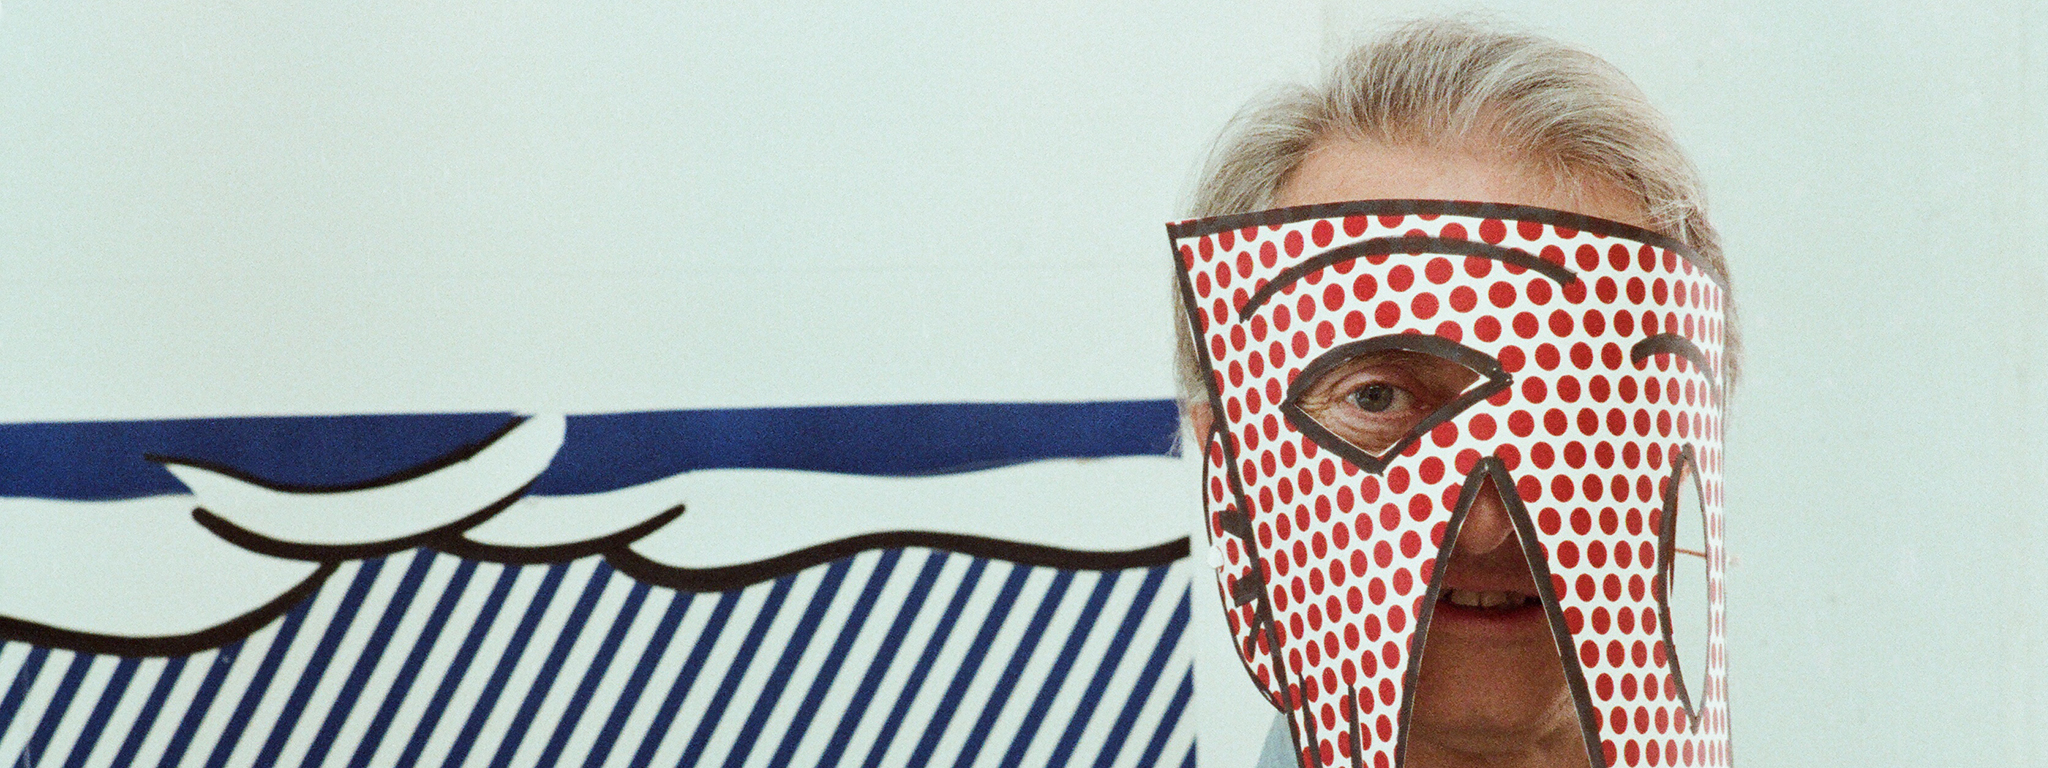 A man with graying hair in a denim shirt wears a paper mask covered in red dots. Behind him is a print made up of blue stripes and red dots